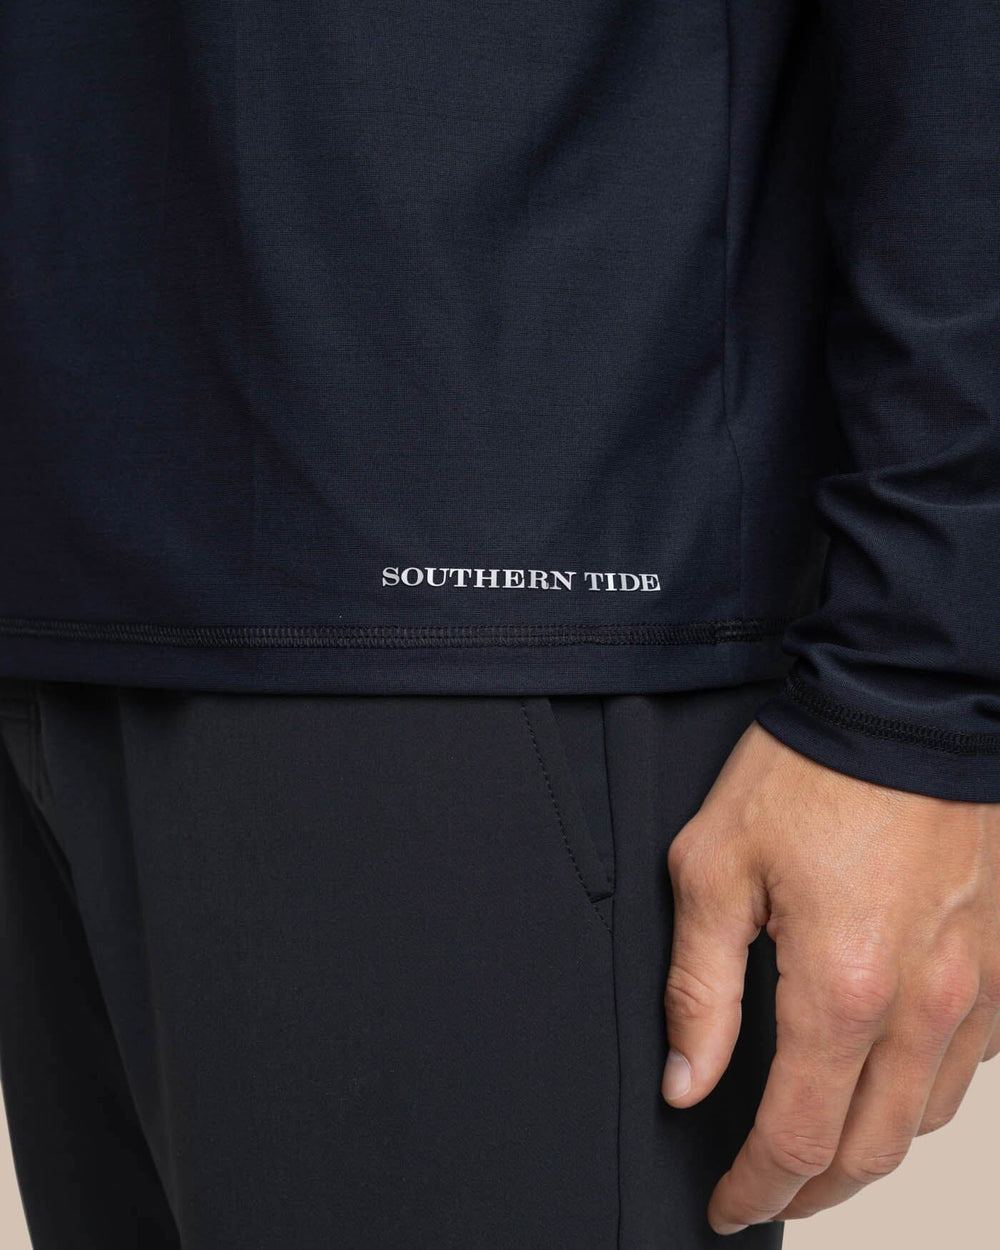 The label view of the Southern Tide brrr-illiant Performance Long Sleeve T-Shirt by Southern Tide - Caviar Black